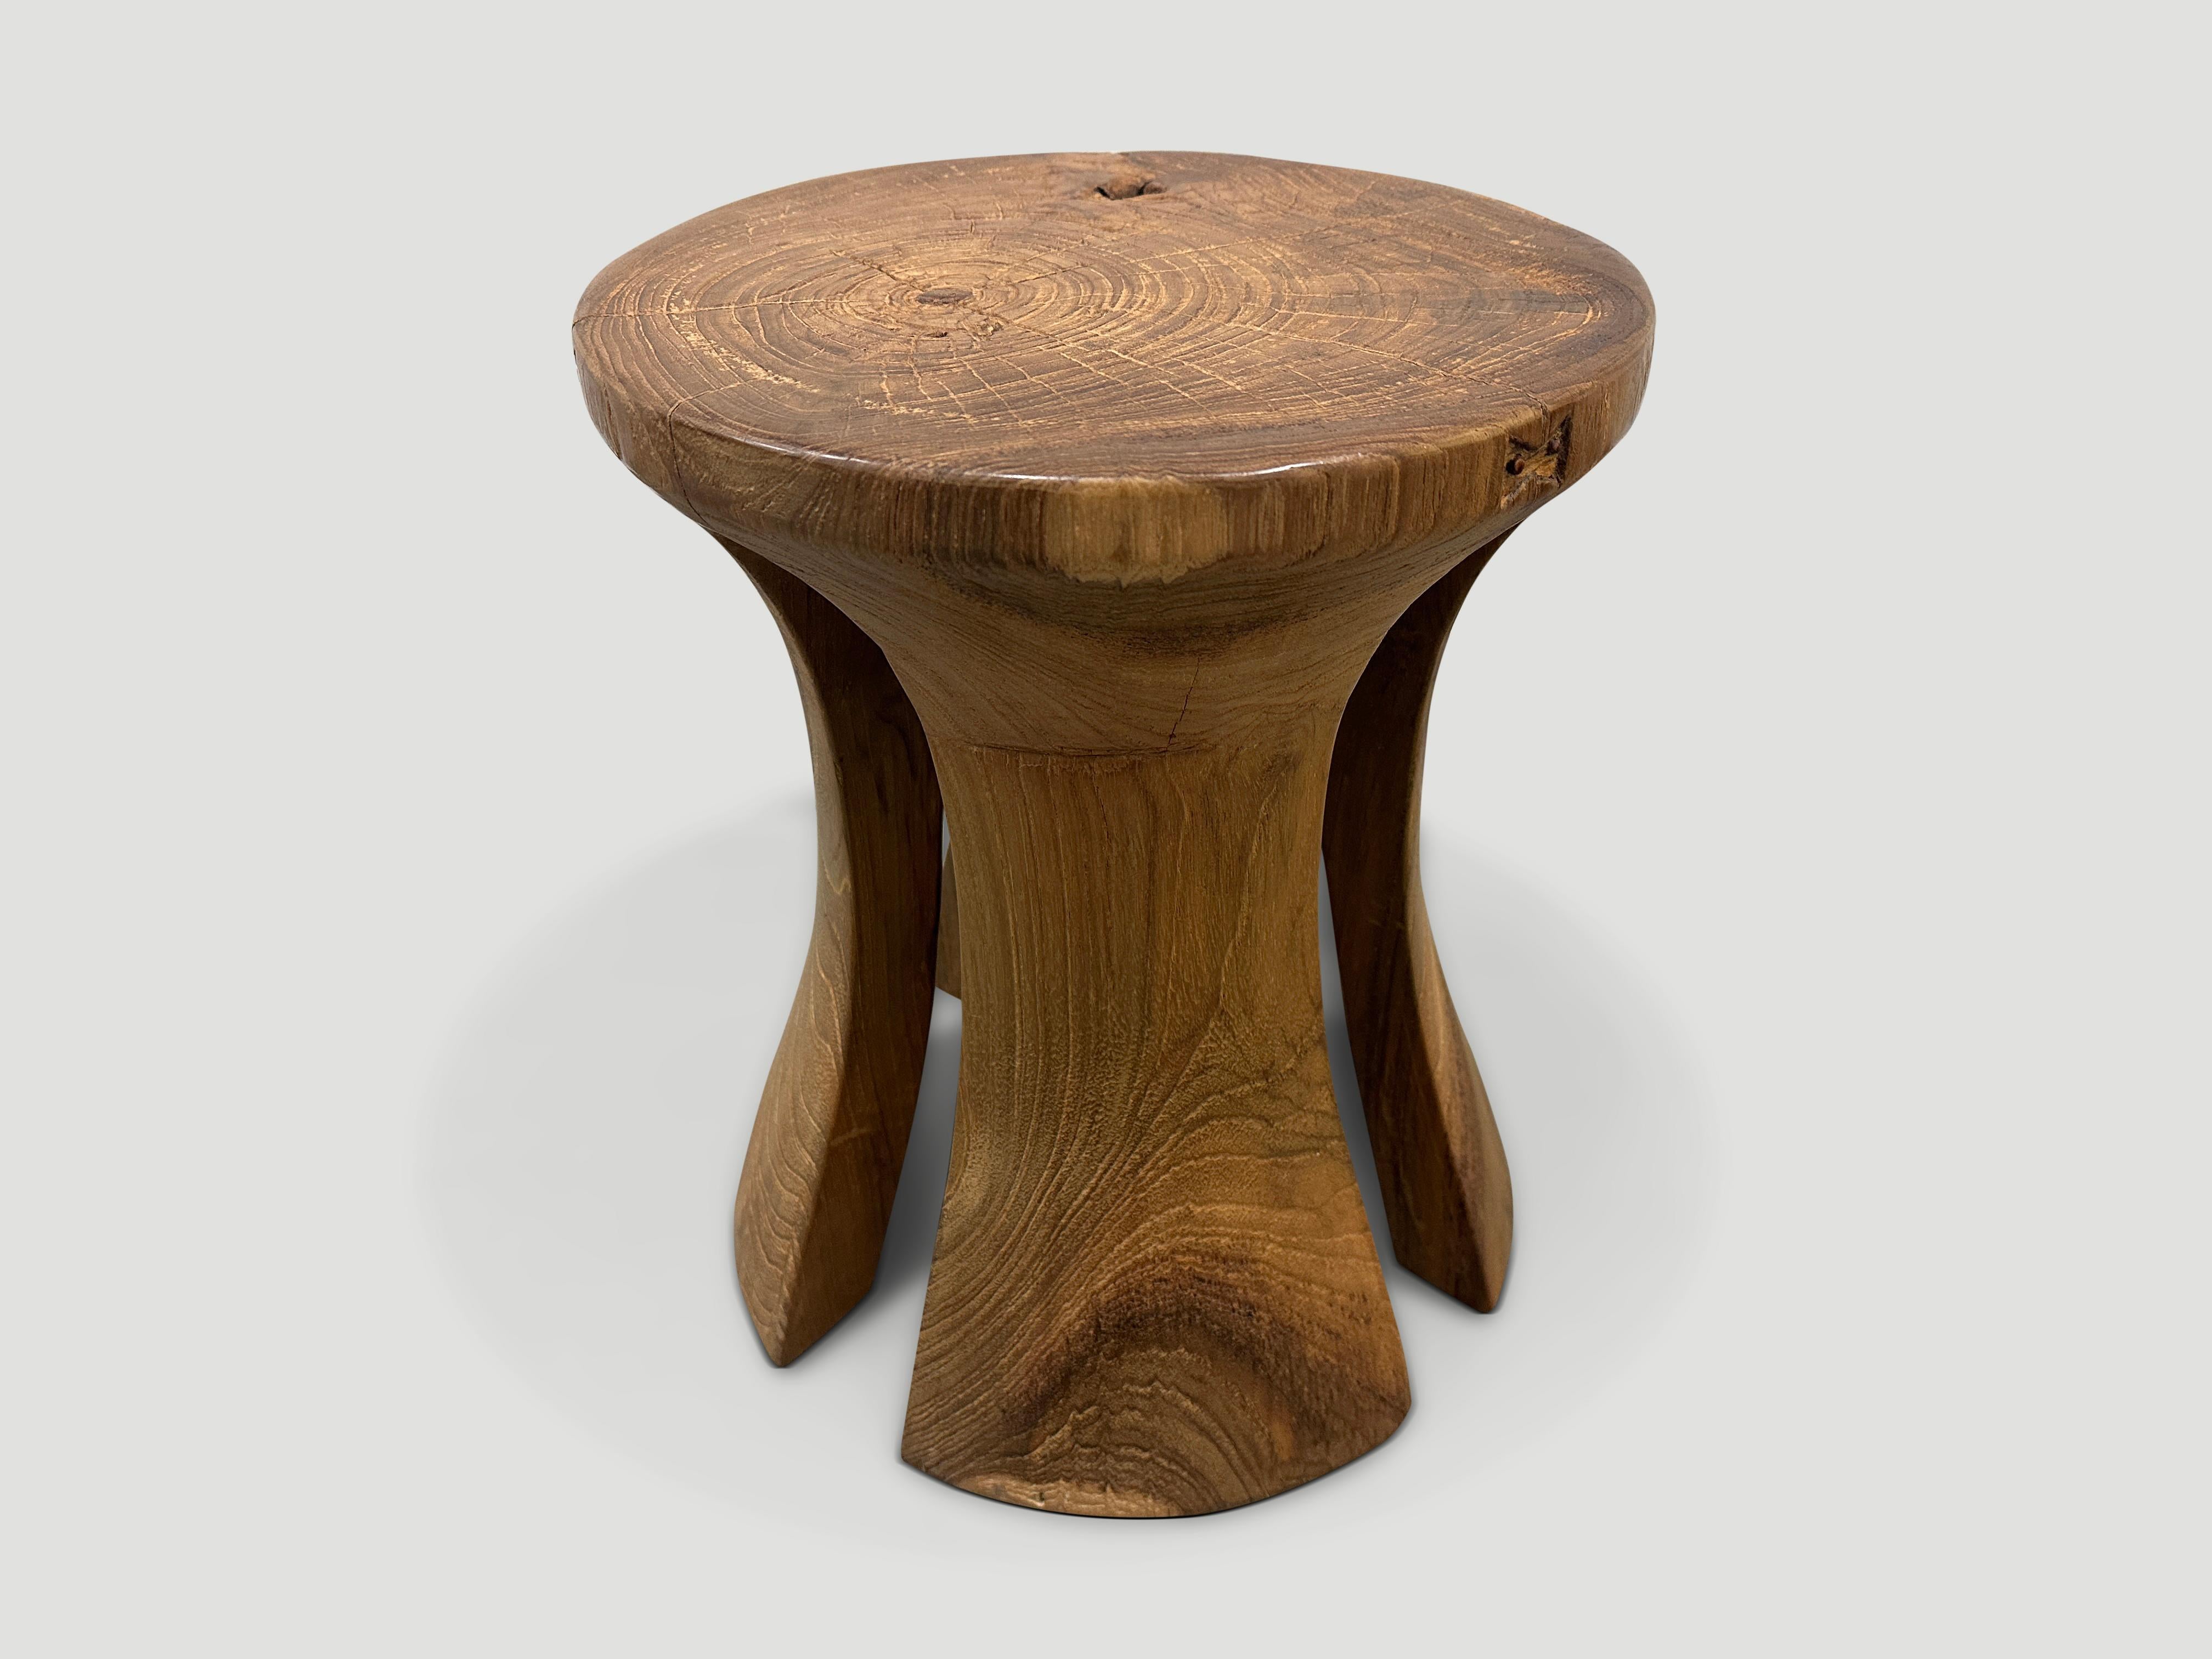 Andrianna Shamaris Sculptural Teak Wood Side Table or Stool In Excellent Condition For Sale In New York, NY